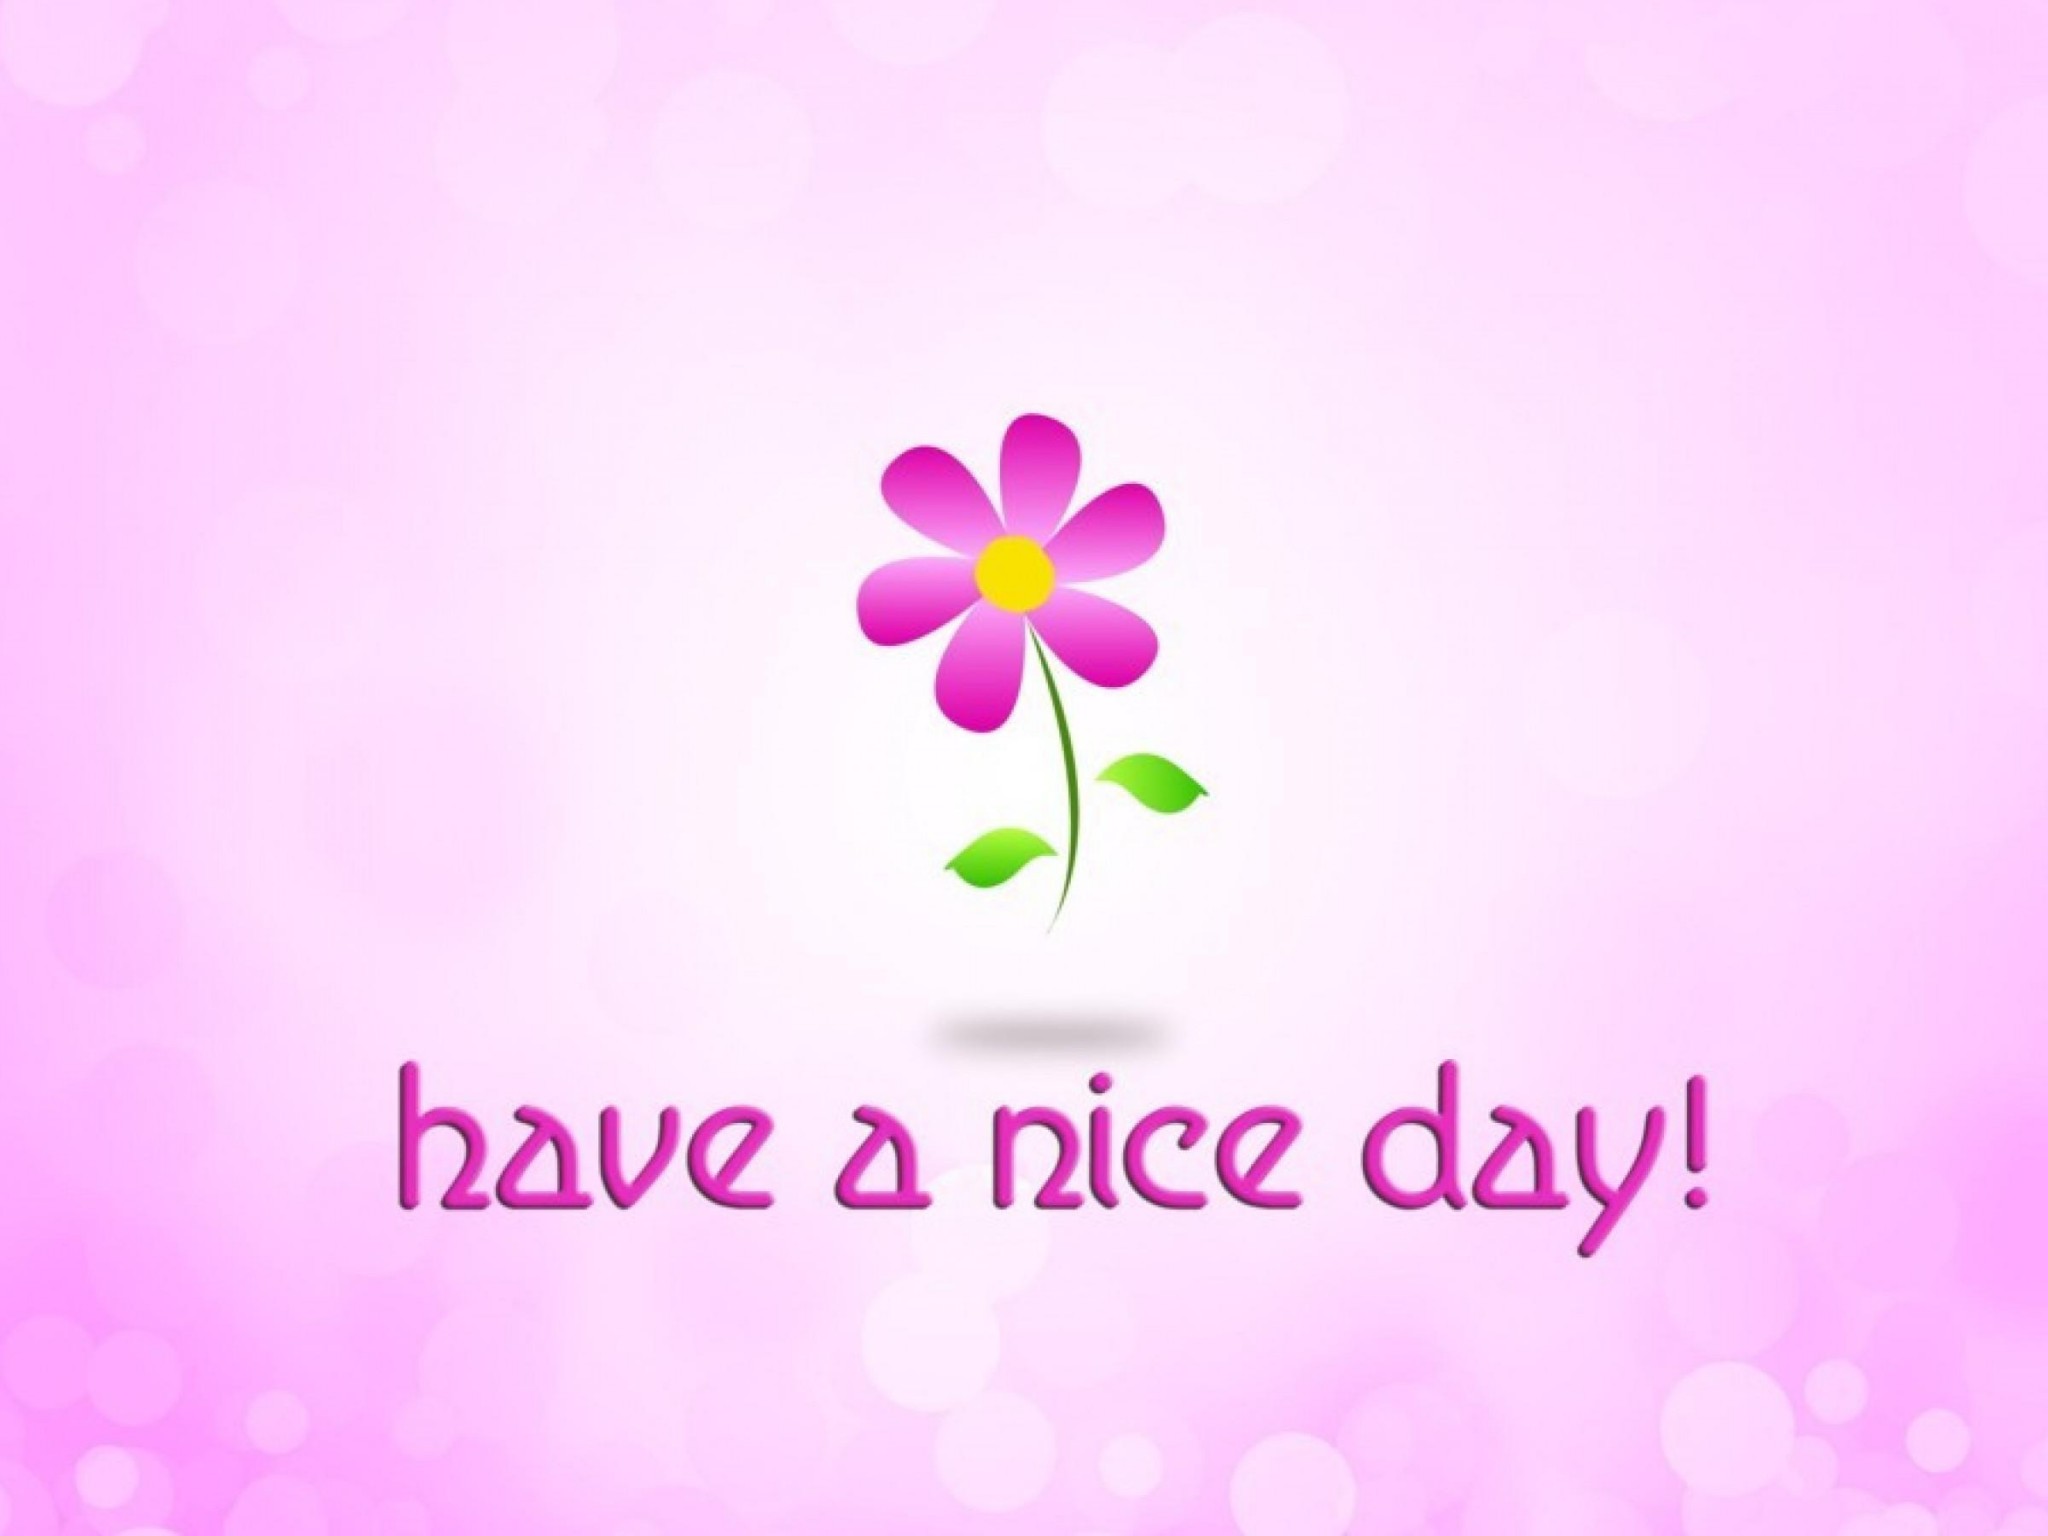 Small Flower On A Pink Background Have Nice Day HD